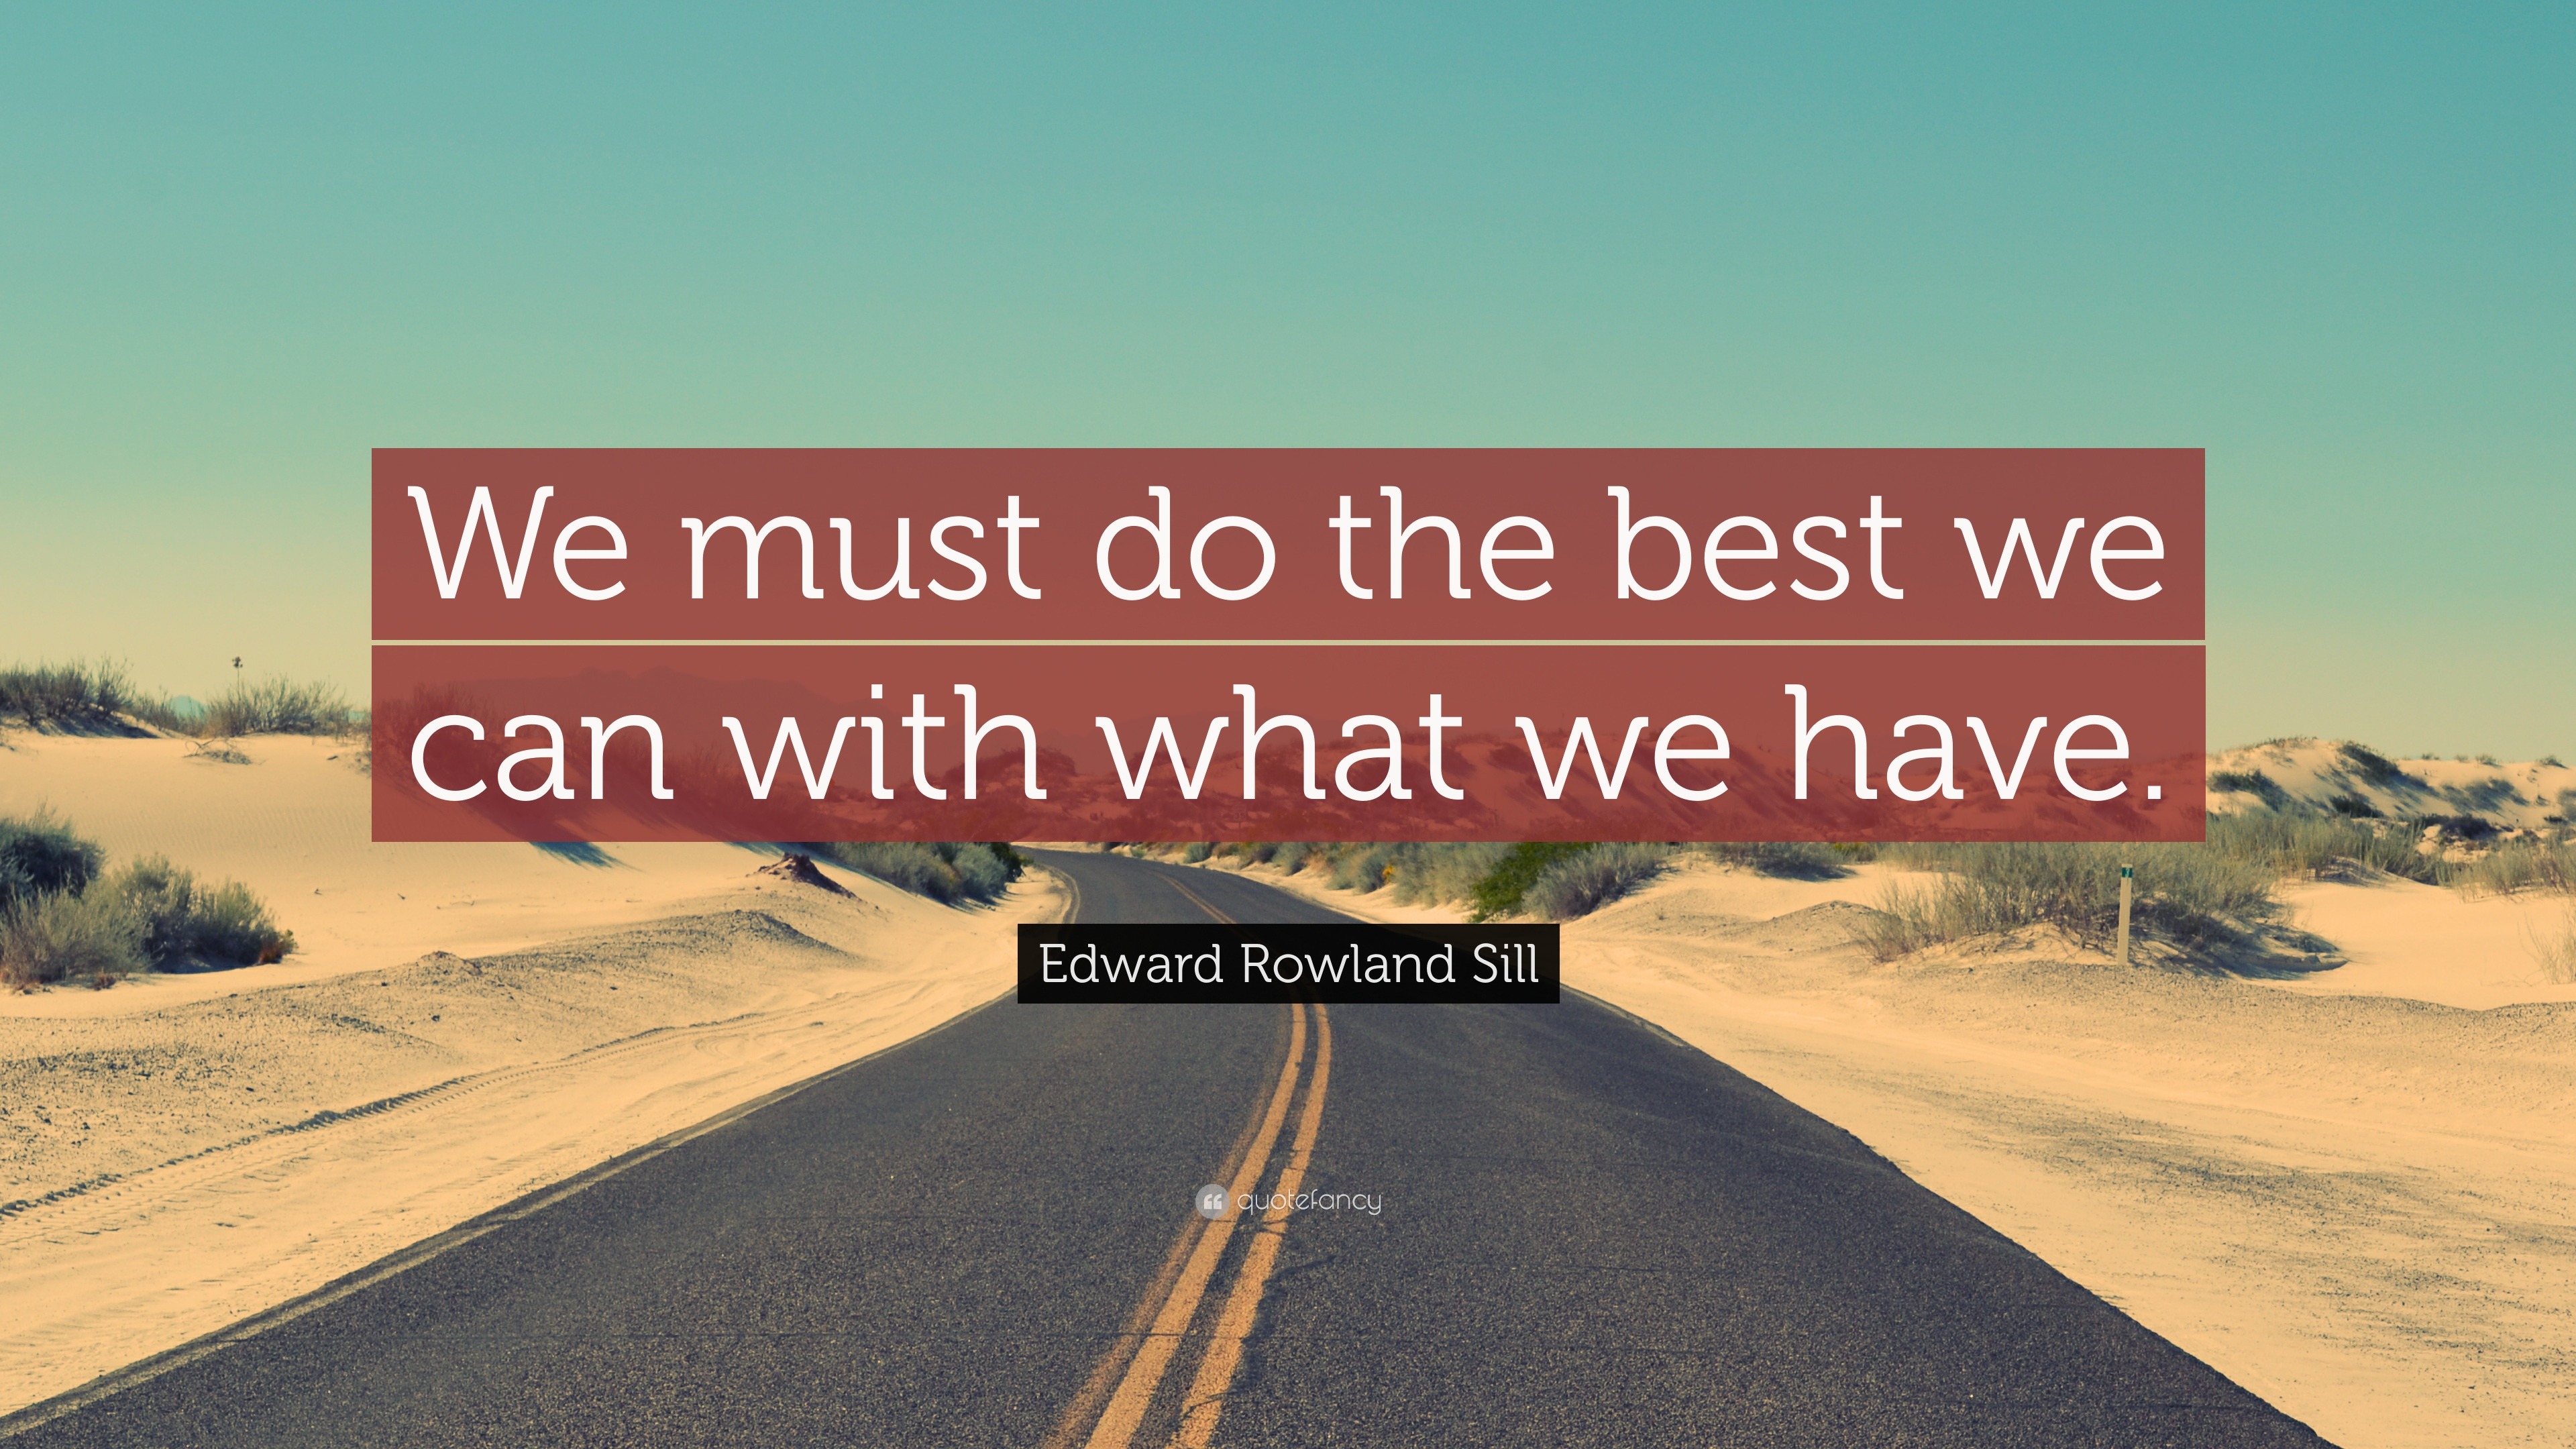 Edward Rowland Sill Quote: “We must do the best we can with what we have.”